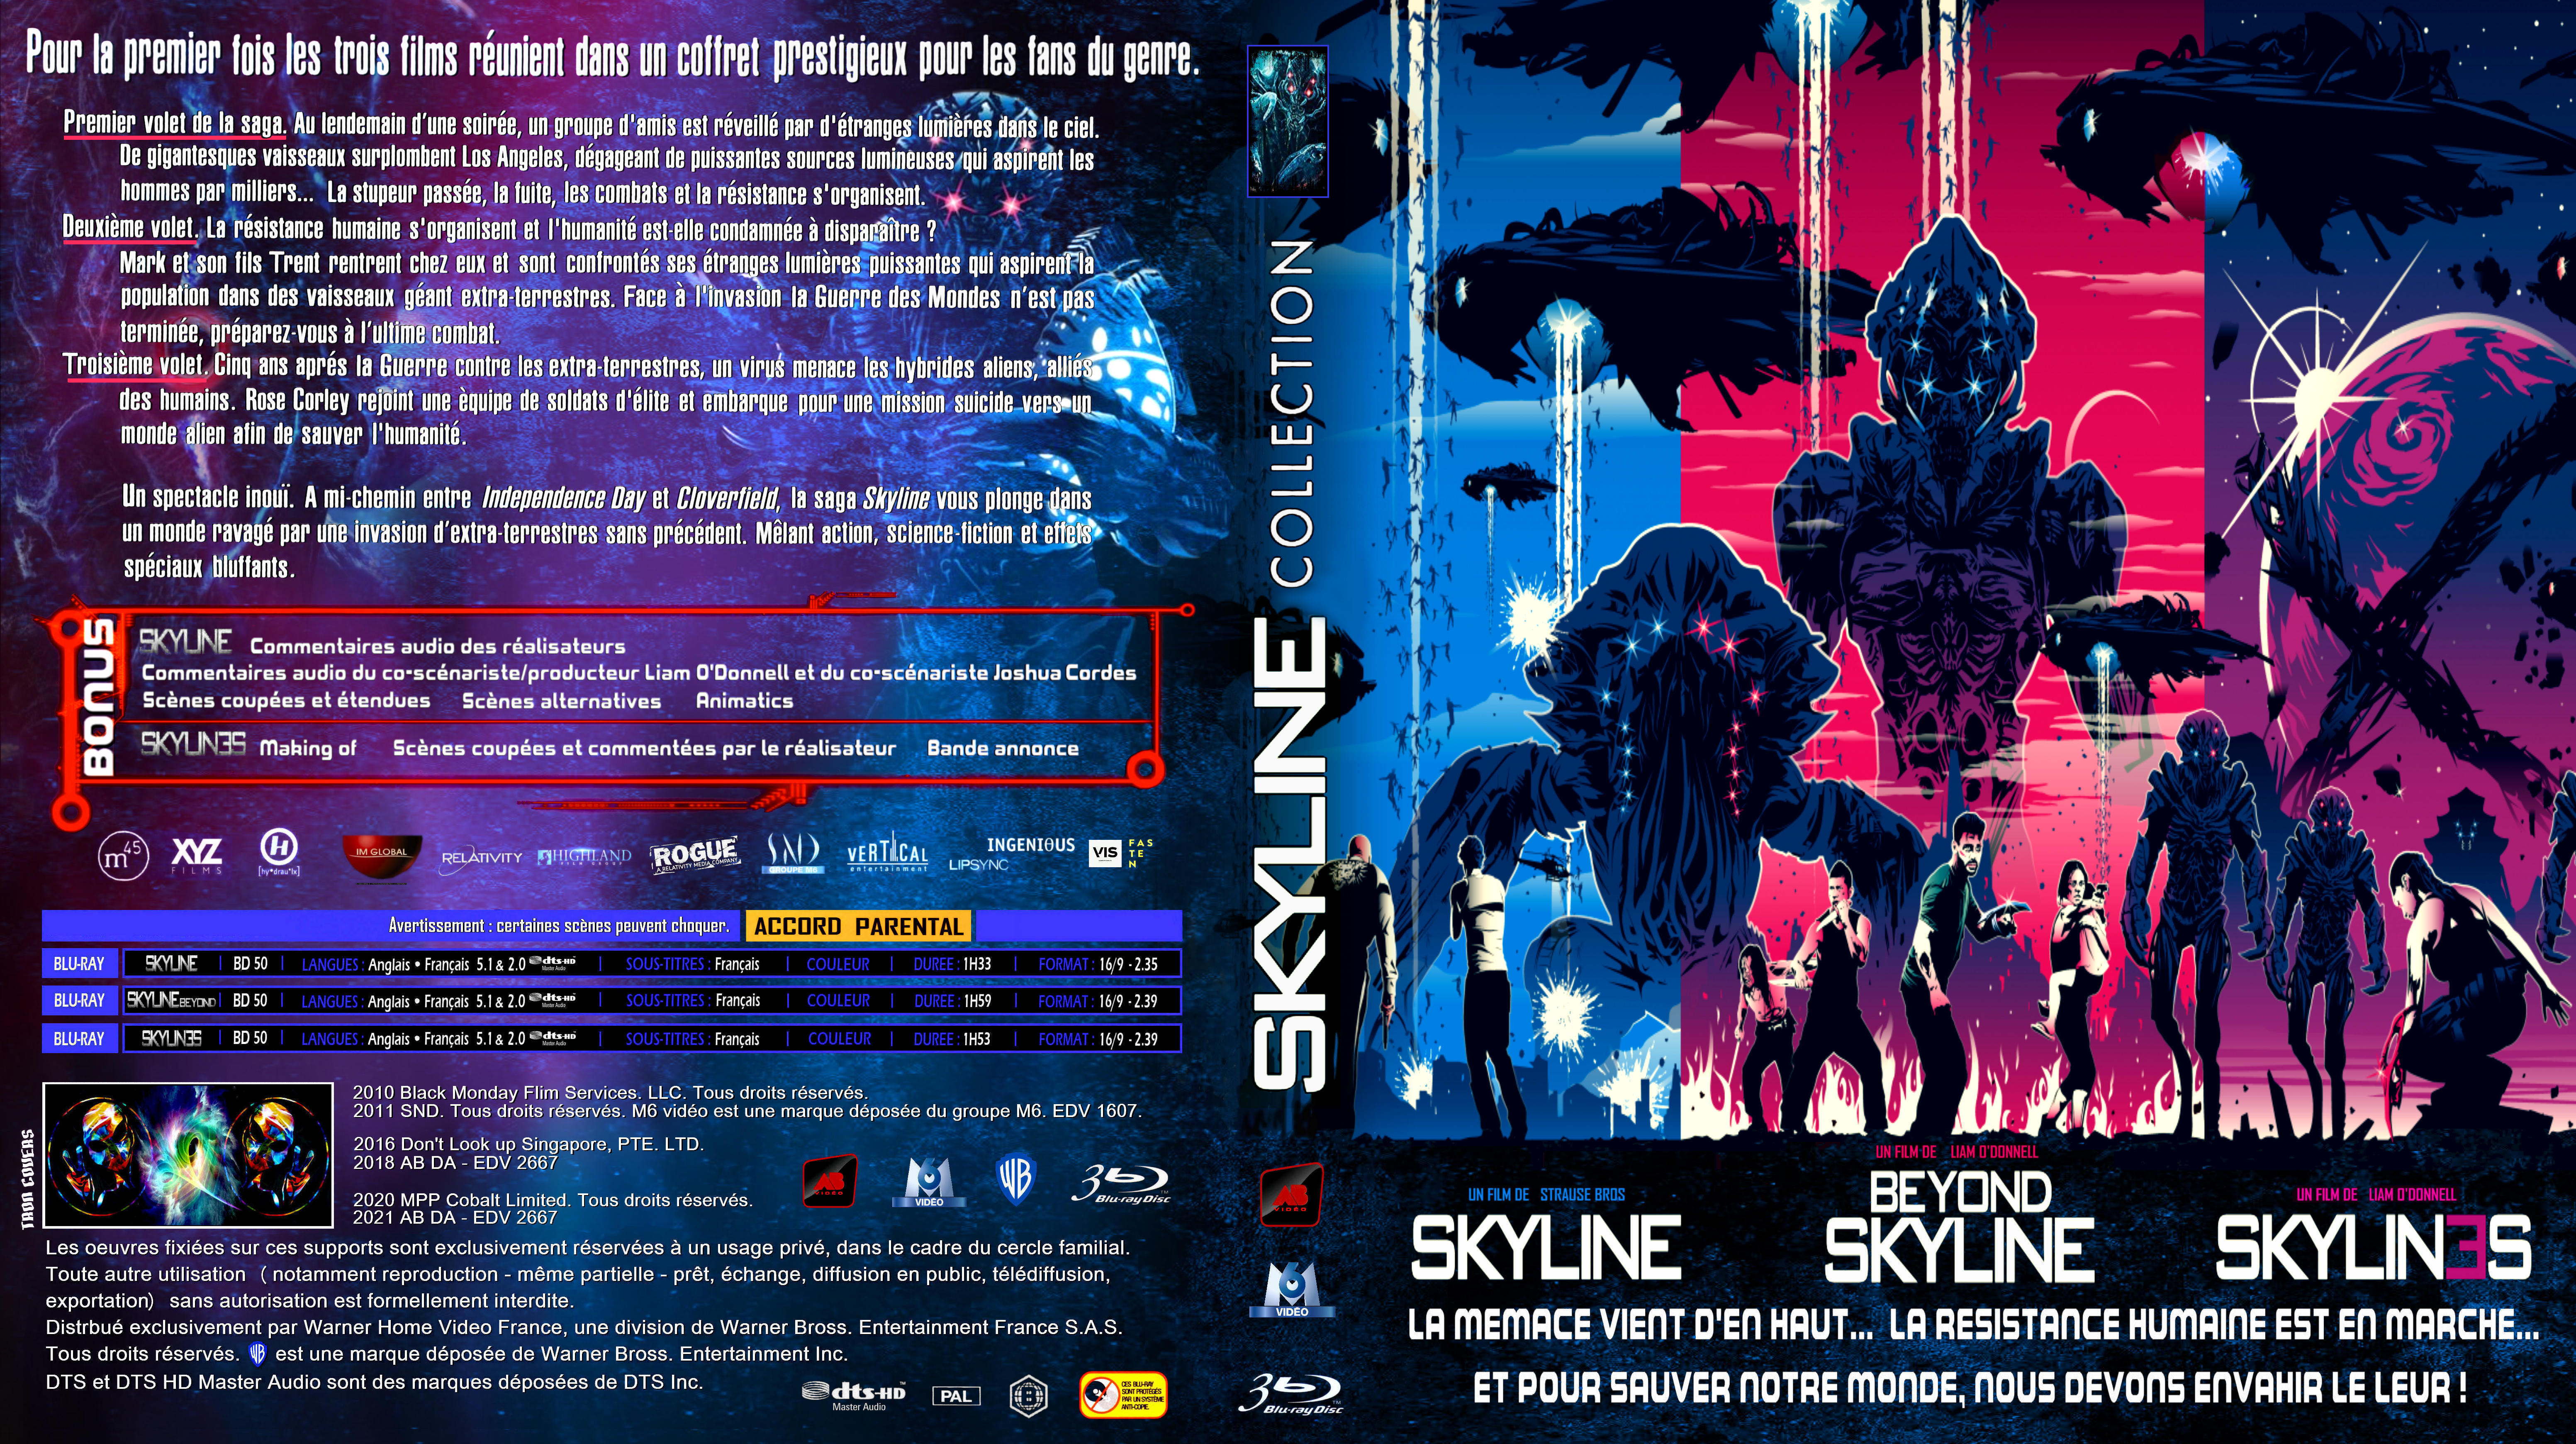 Jaquette DVD Skylines collection custom (BLU-RAY)